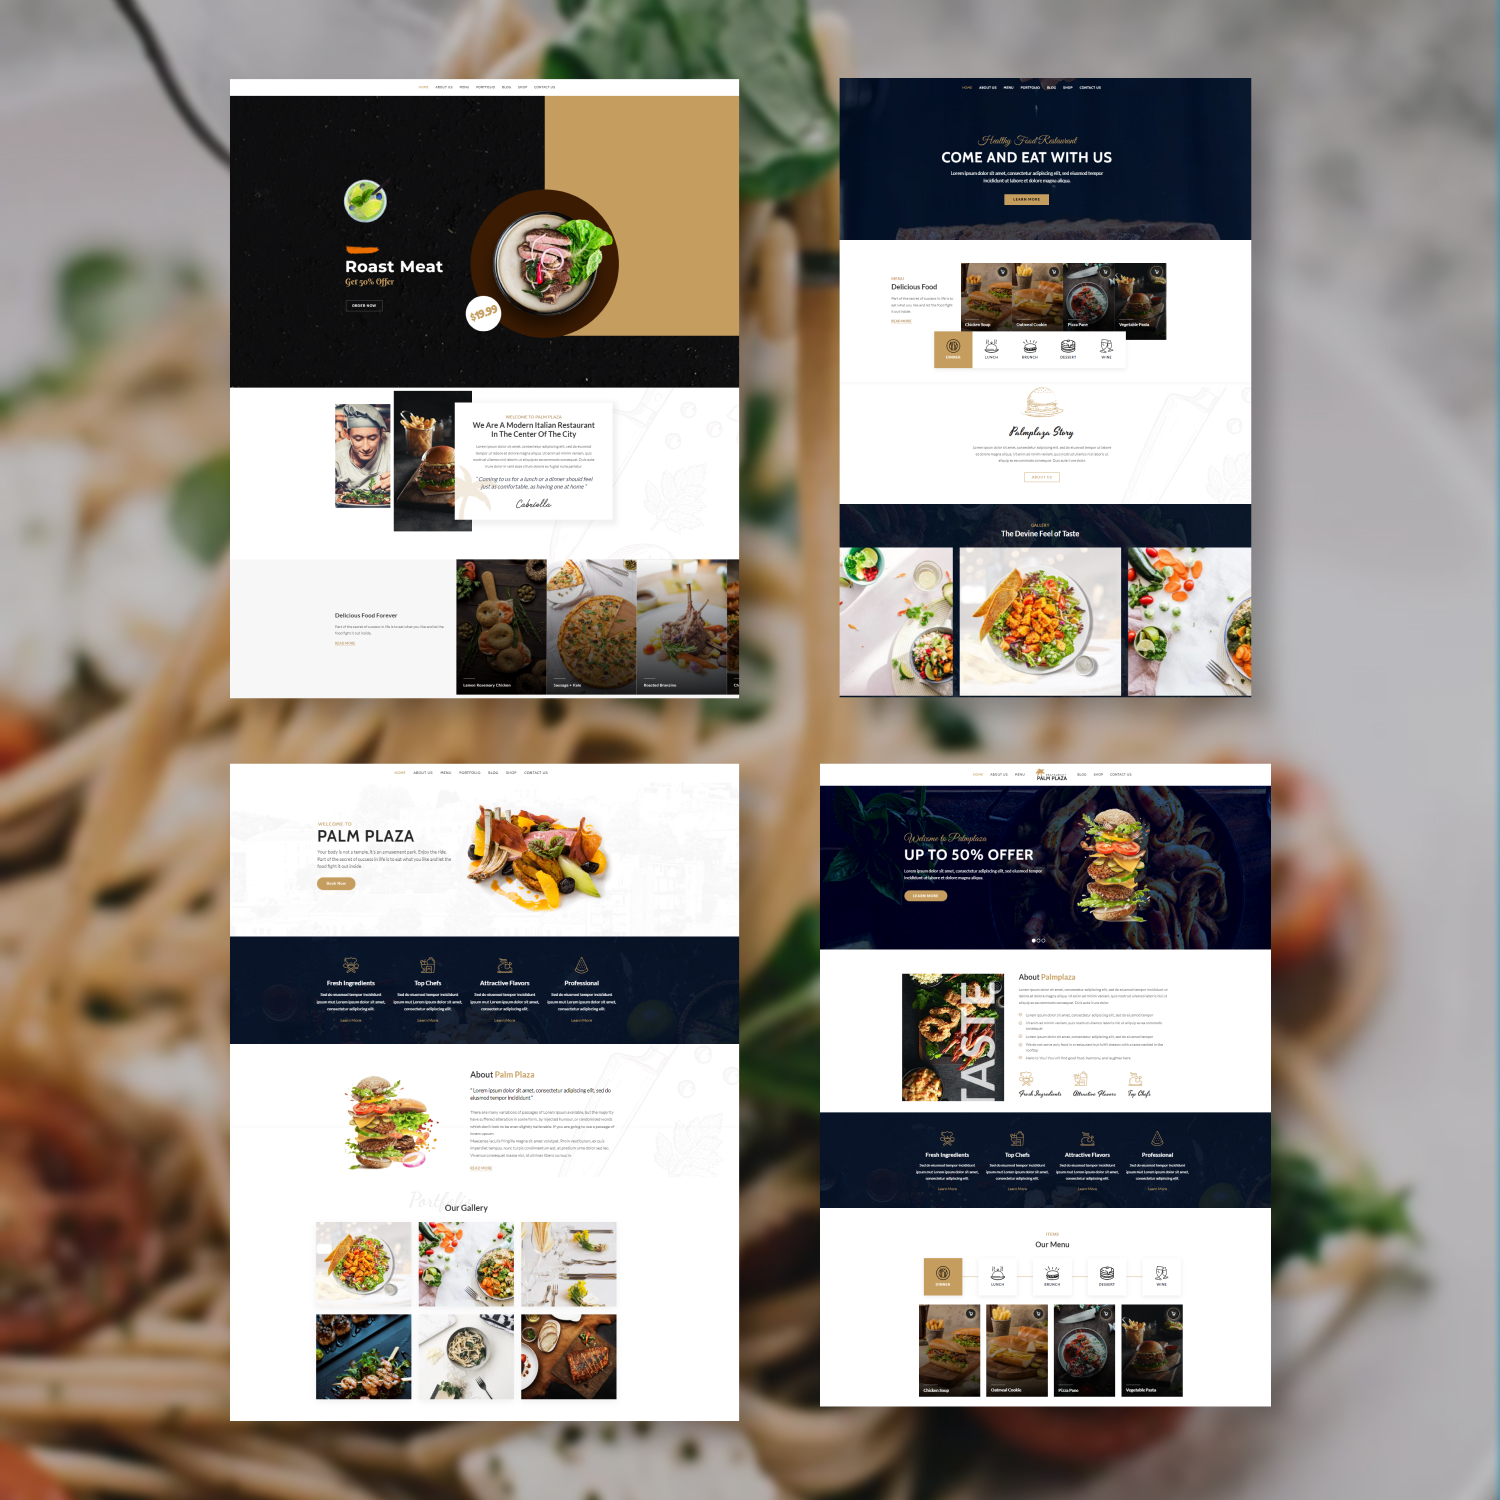 Images with palmplaza restaurant cafe wordpress theme.